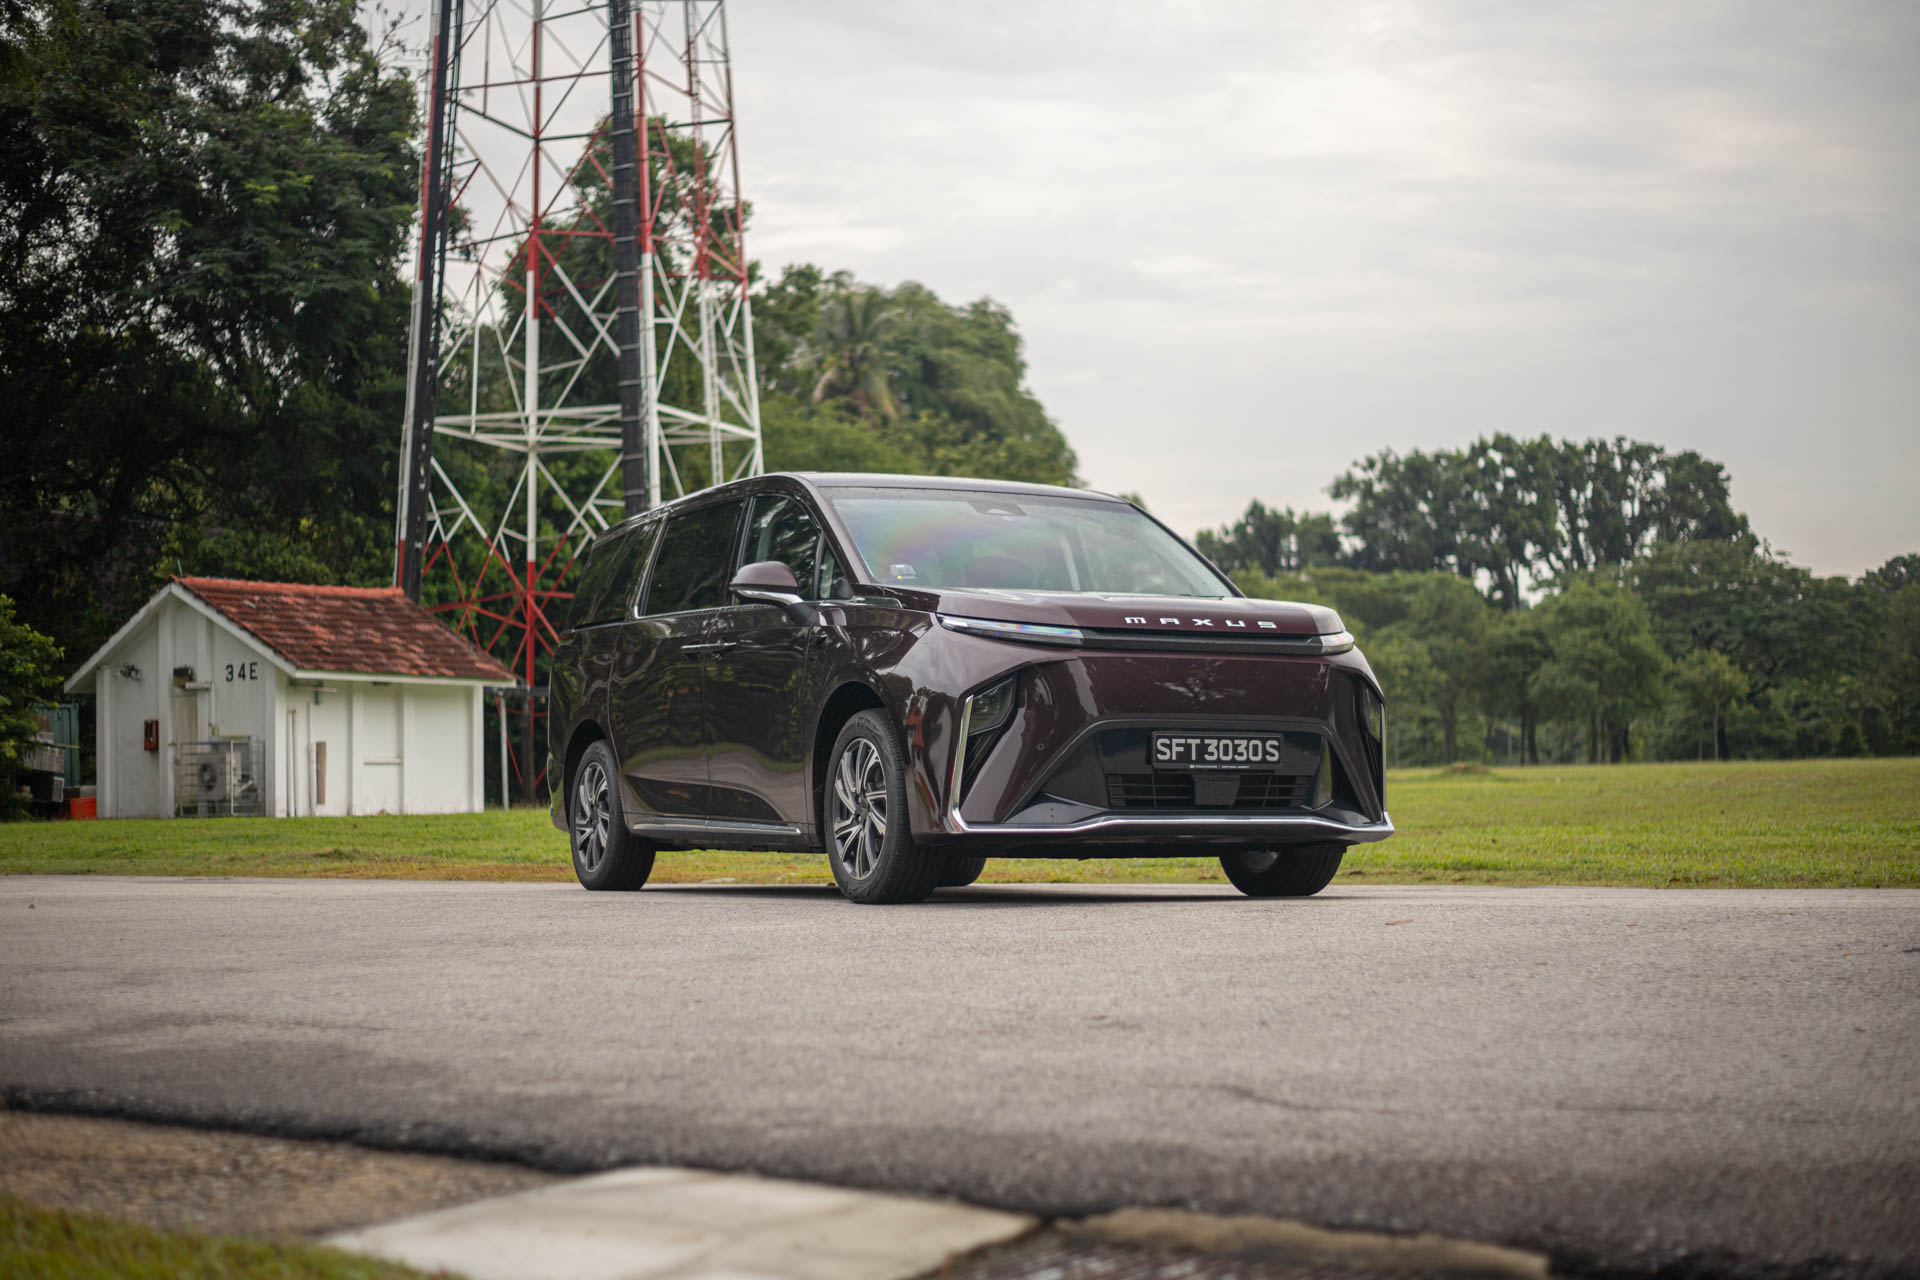 mreview: 2023 maxus mifa 9 - the best value electric luxury mpv